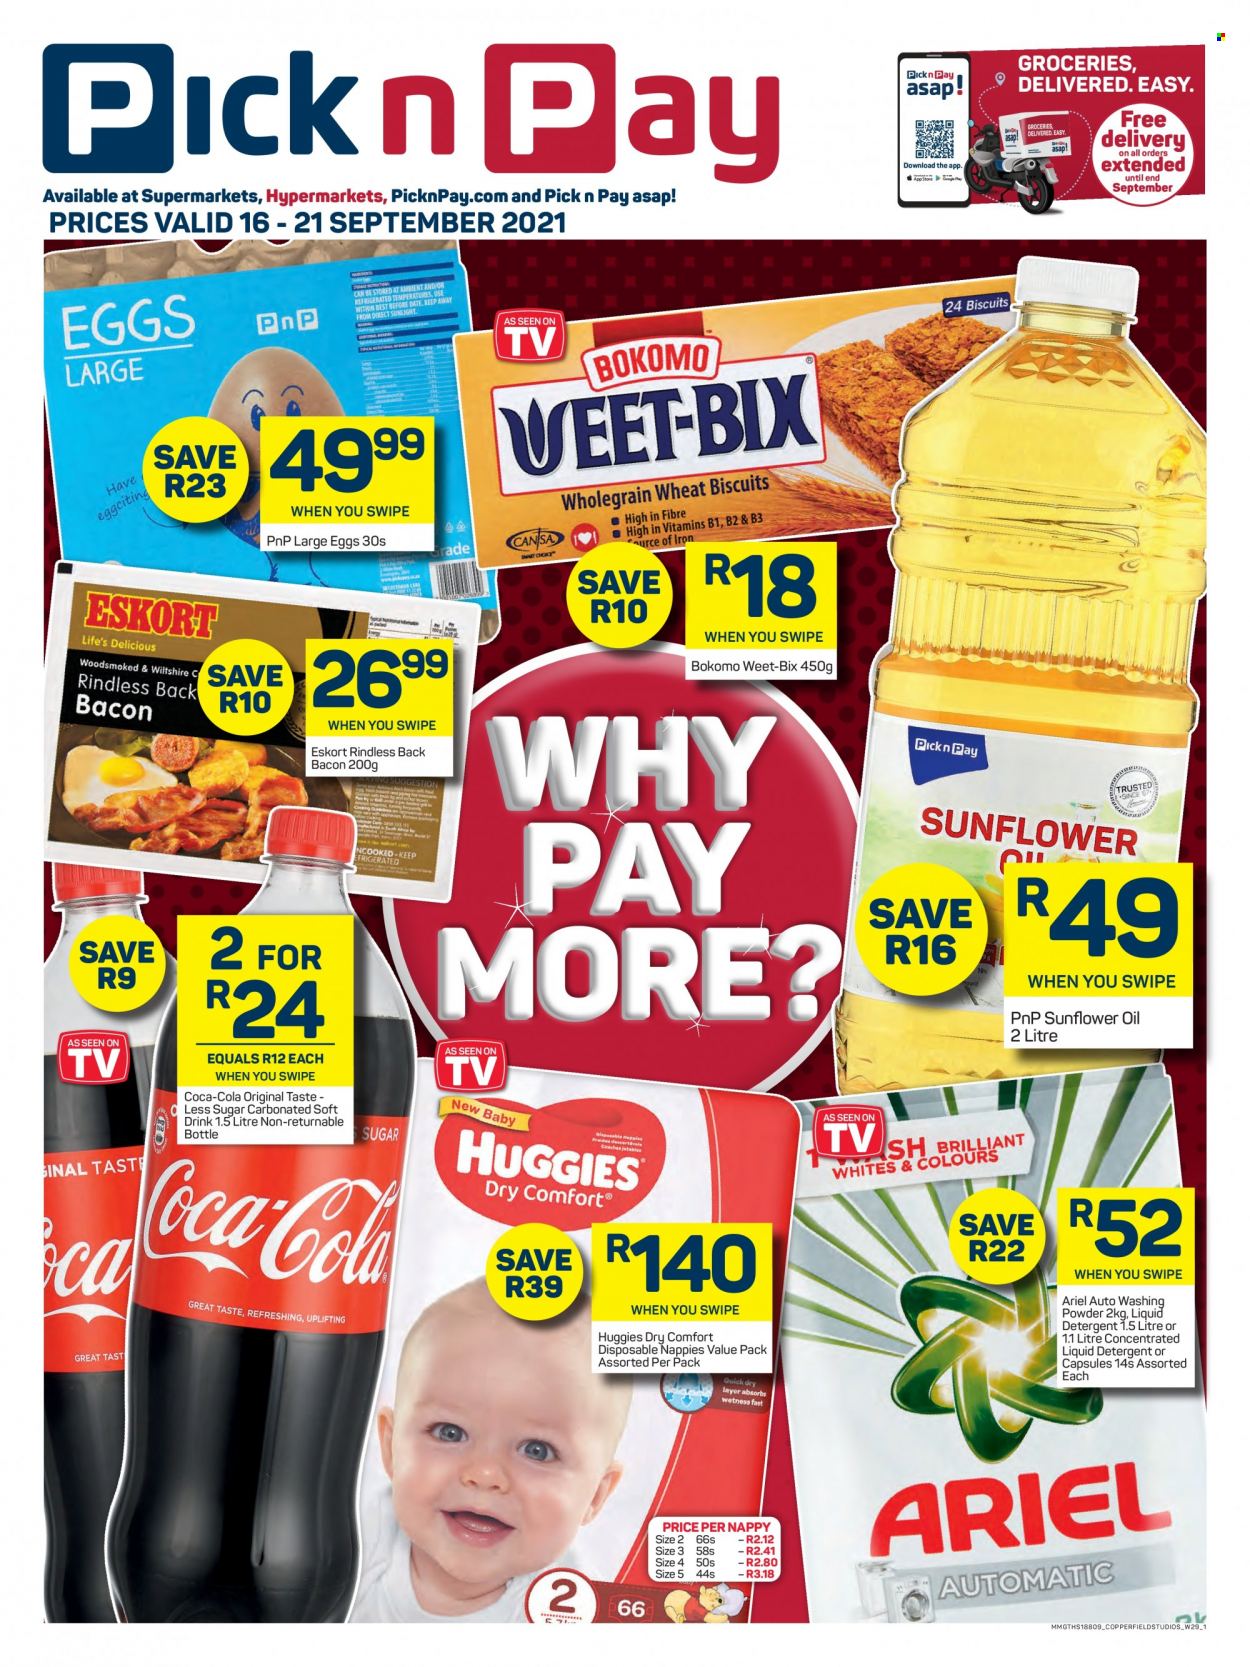 Pick n Pay specials - 09.16.2021 - 09.21.2021. 